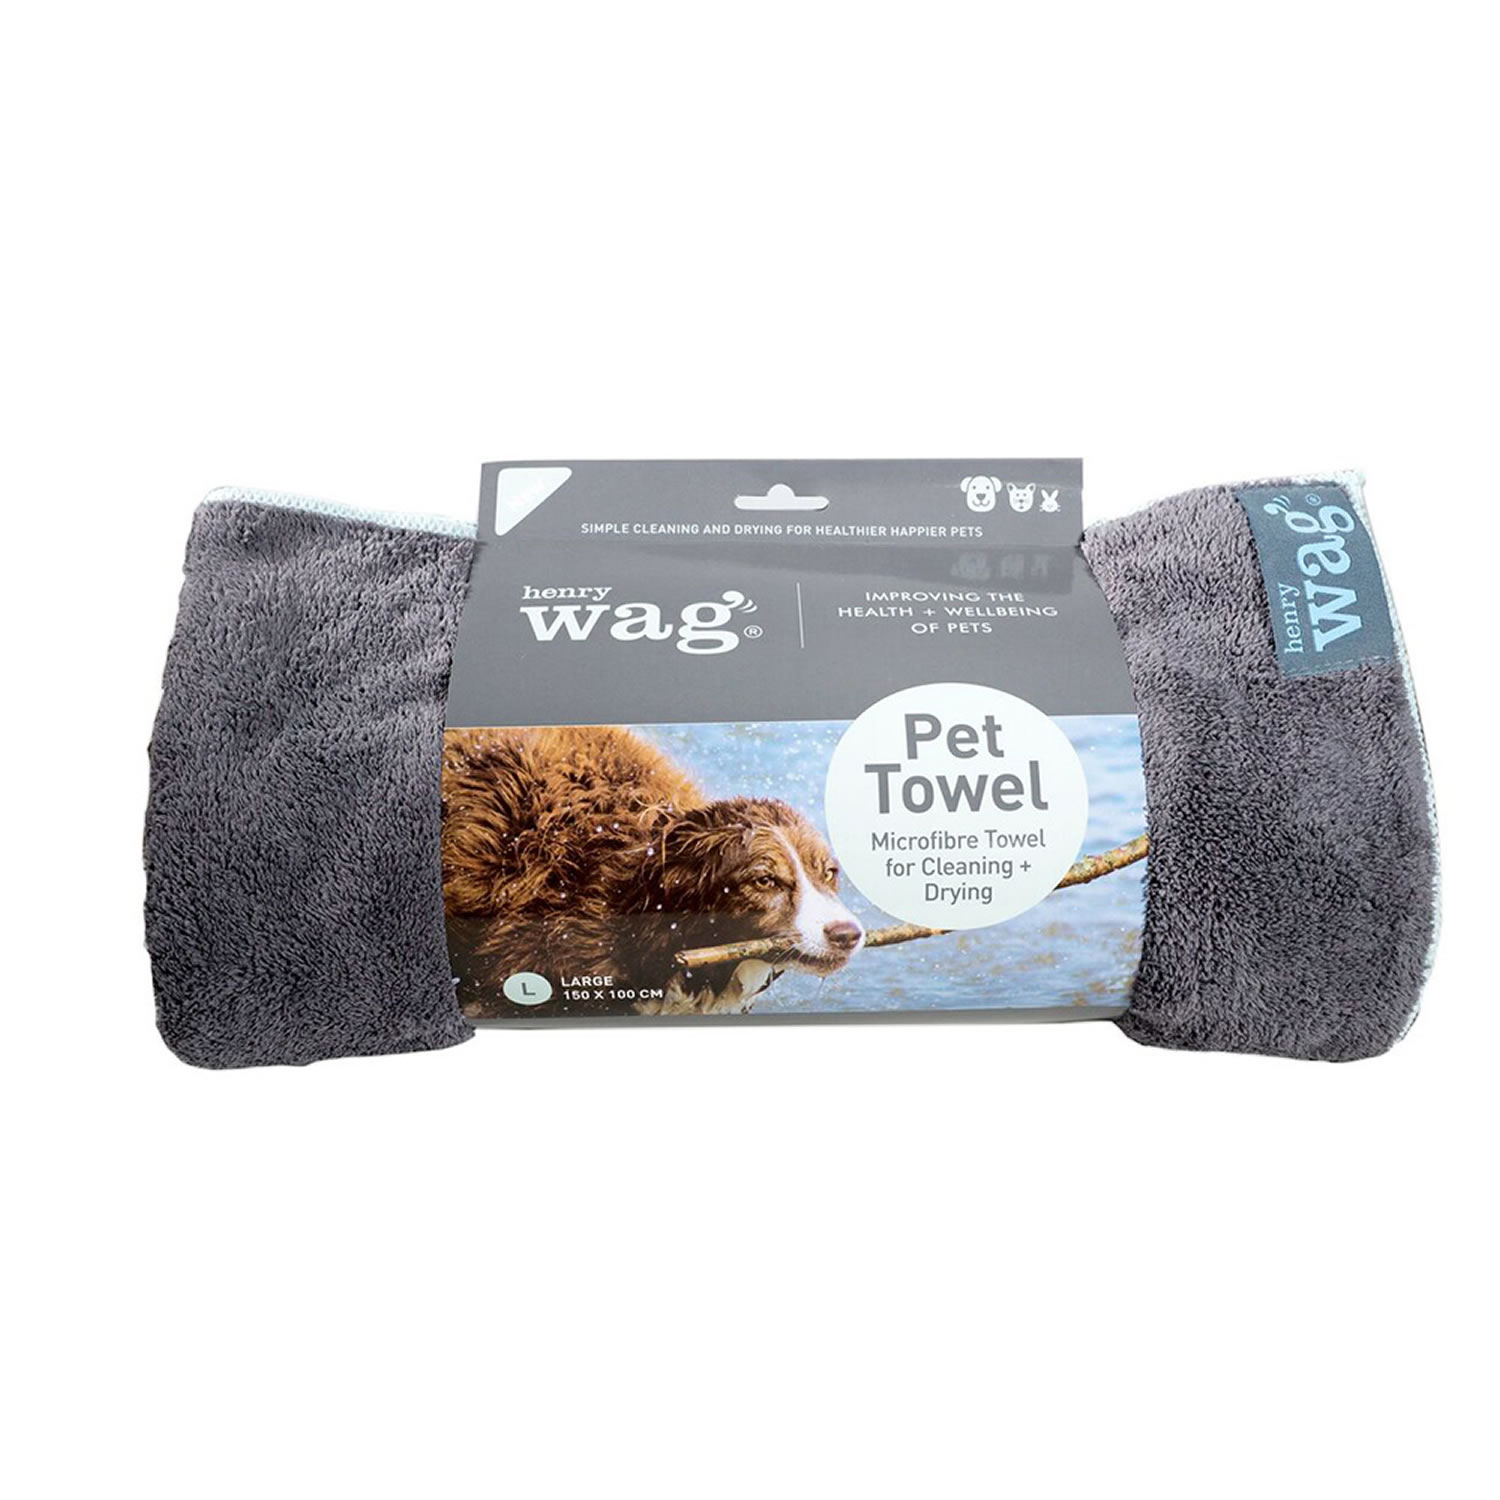 HENRY WAG MICROFIBRE TOWEL LARGE LARGE